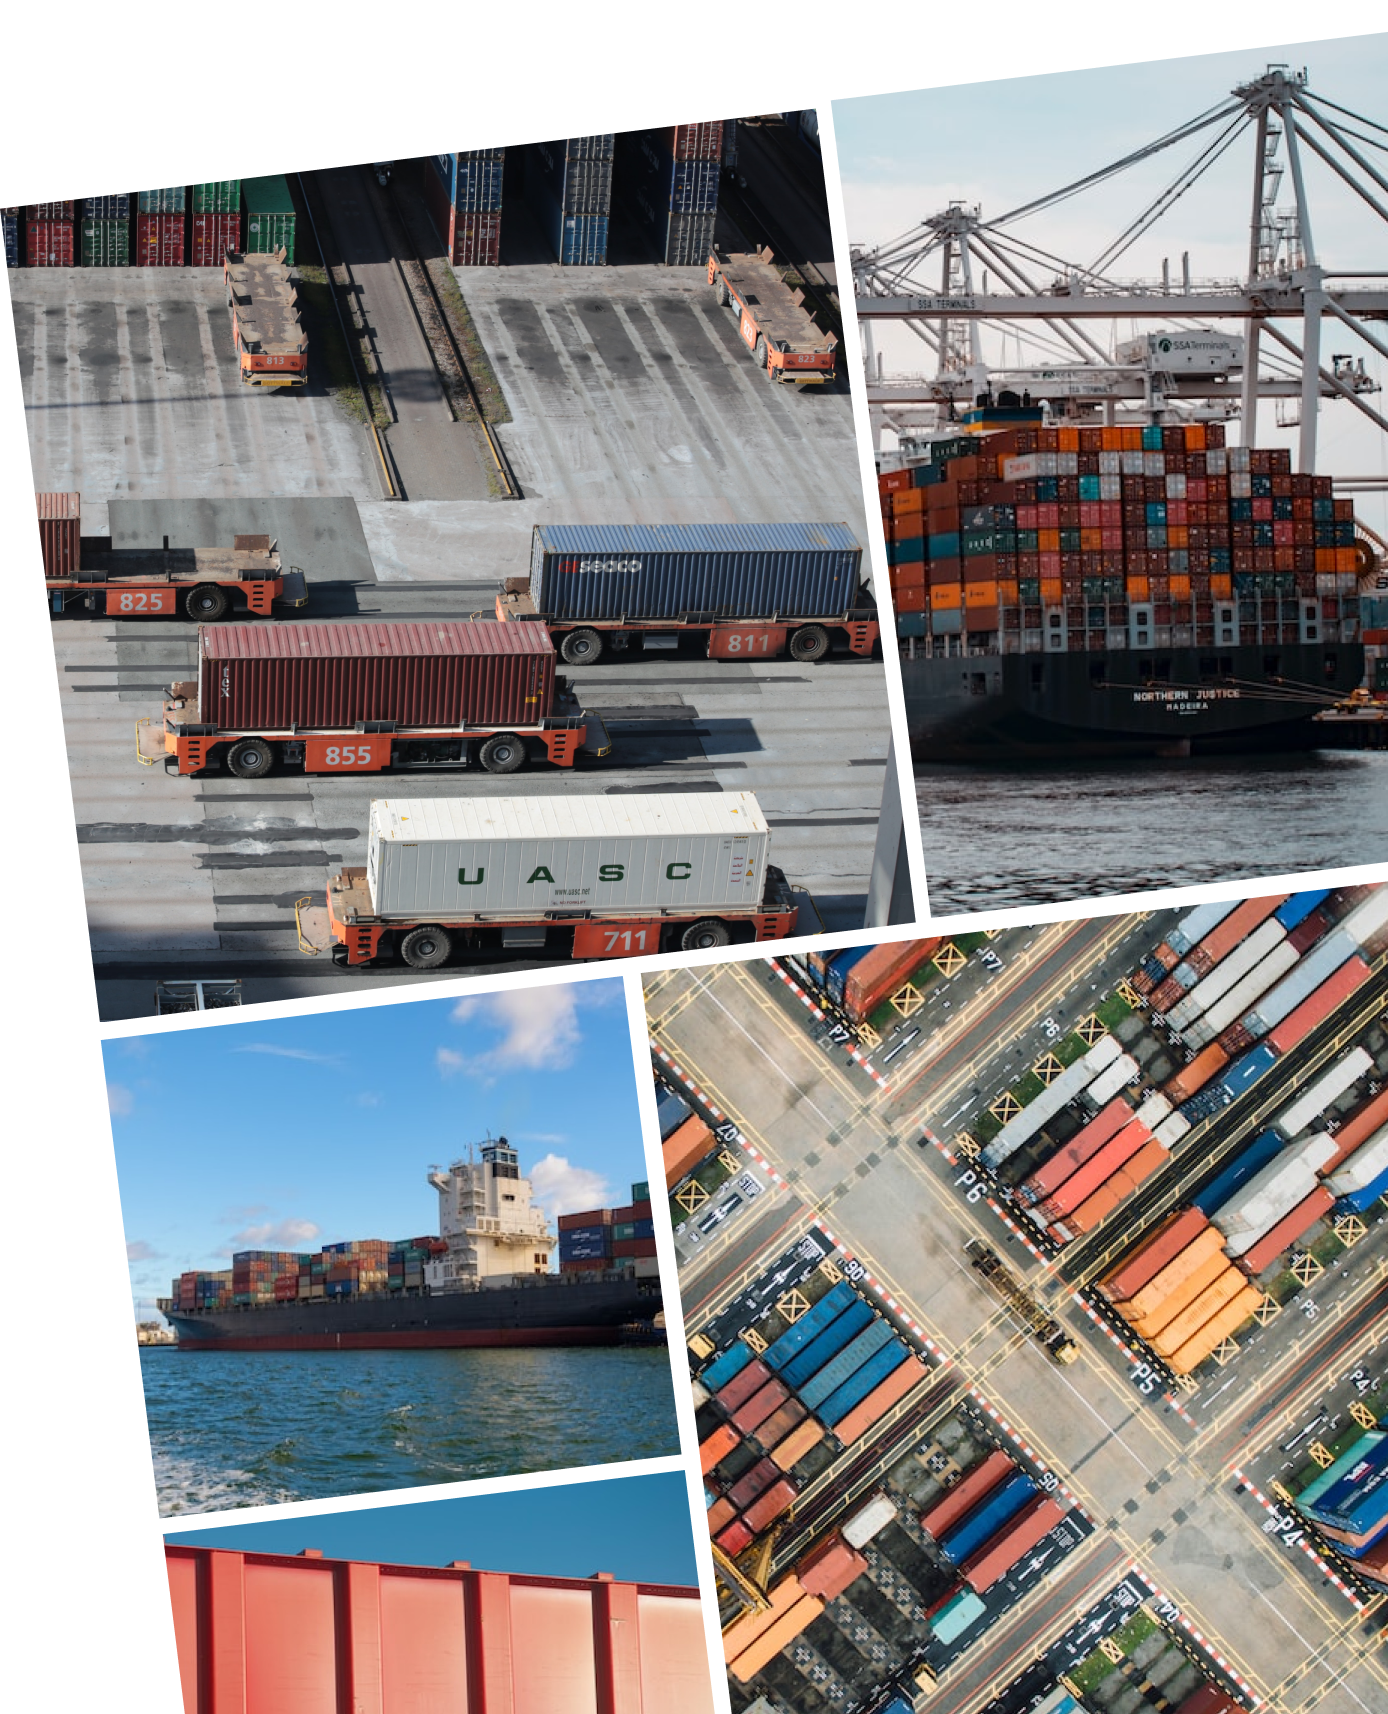 A collage of container shipping operations, showcasing trucks transporting containers, a cargo ship loaded with containers, and an aerial view of a container terminal.